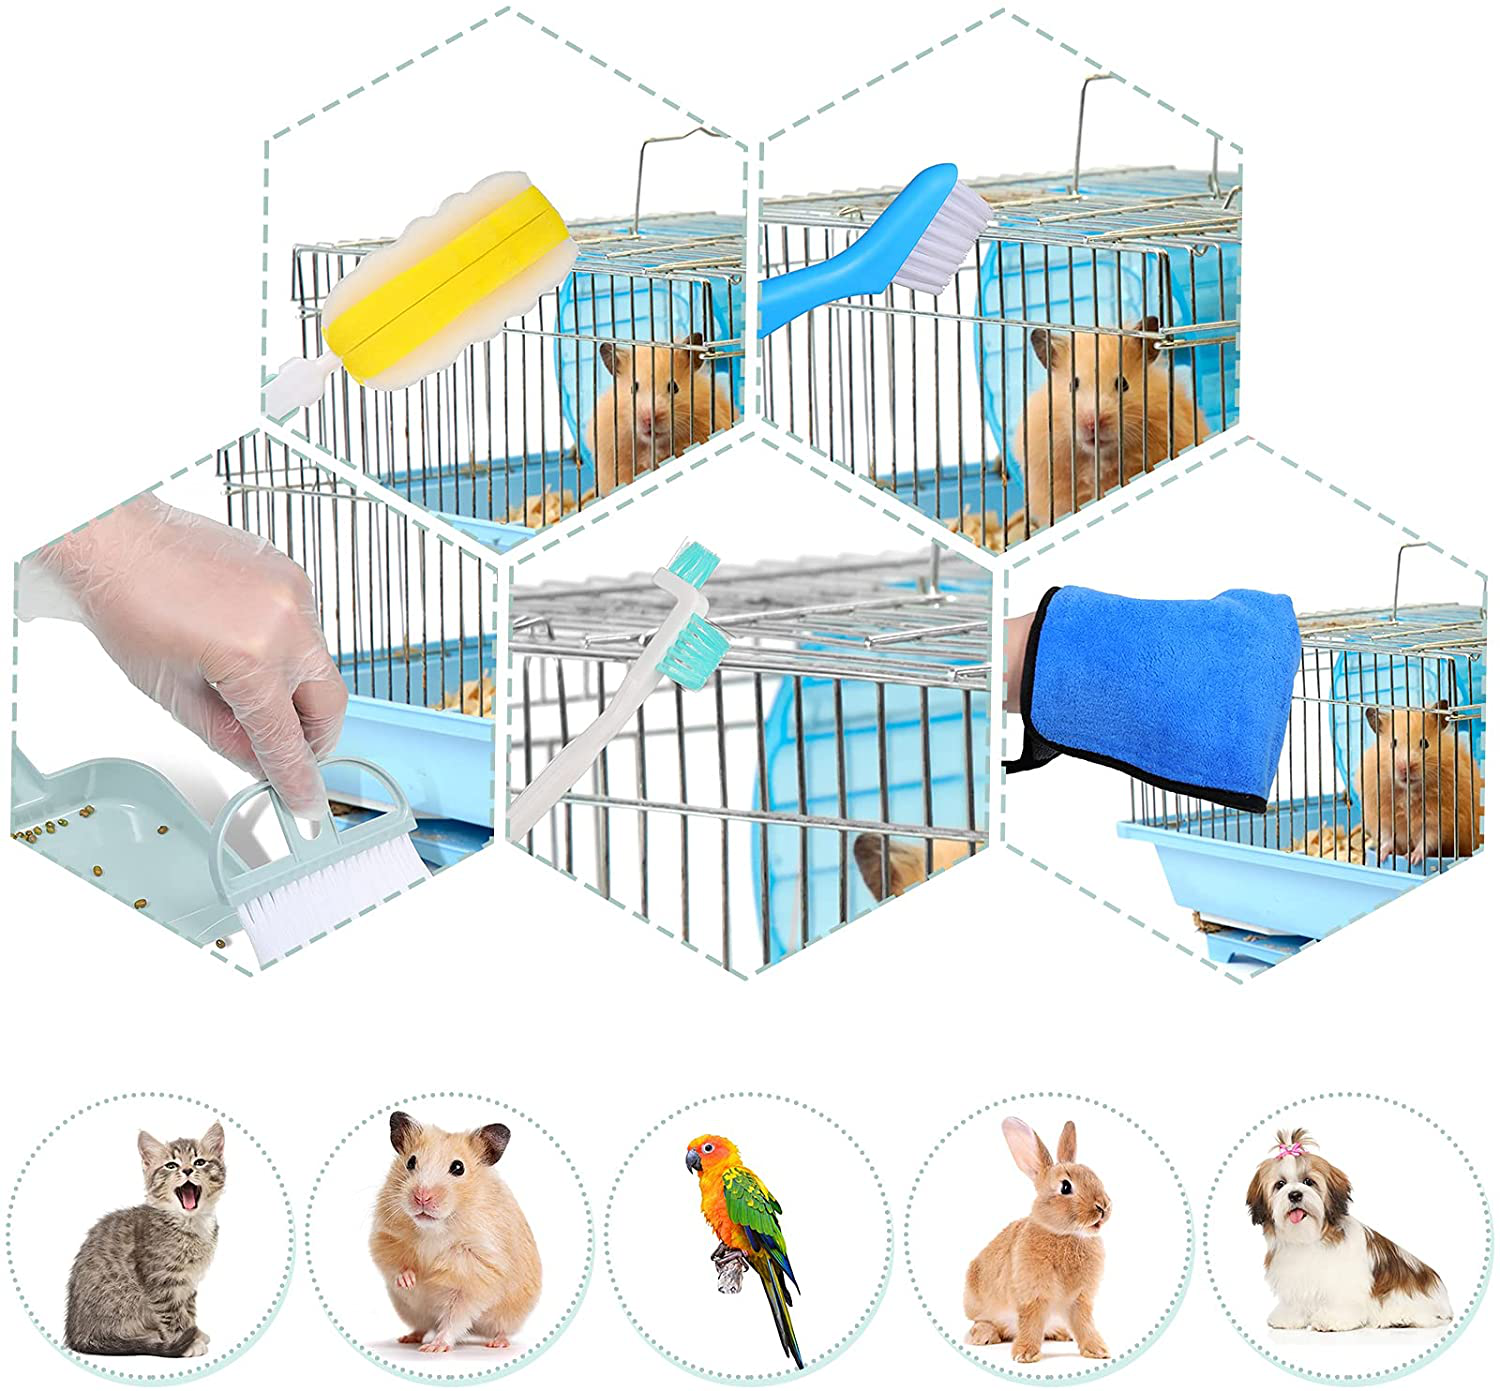 Dandat 17 Pack Pet Cage Cleaner Set for Rabbit Cages Cleaning Dustpan and Broom Pet Playpen Bedding Cleaning Brush Foam Sponge for Guinea Pig Hamster Cat Ferret Birds Parrot Chinchilla Small Animals